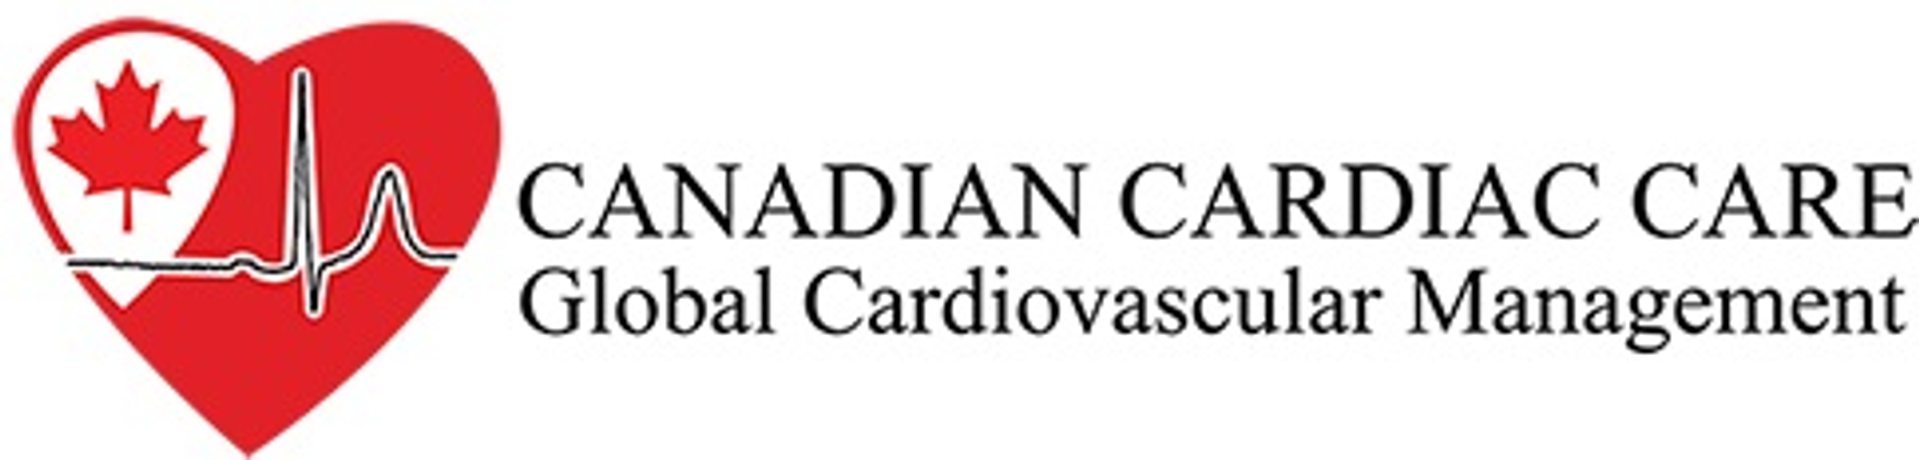 Cardiovascular Care Solutions for Patients - Medical / Health Care